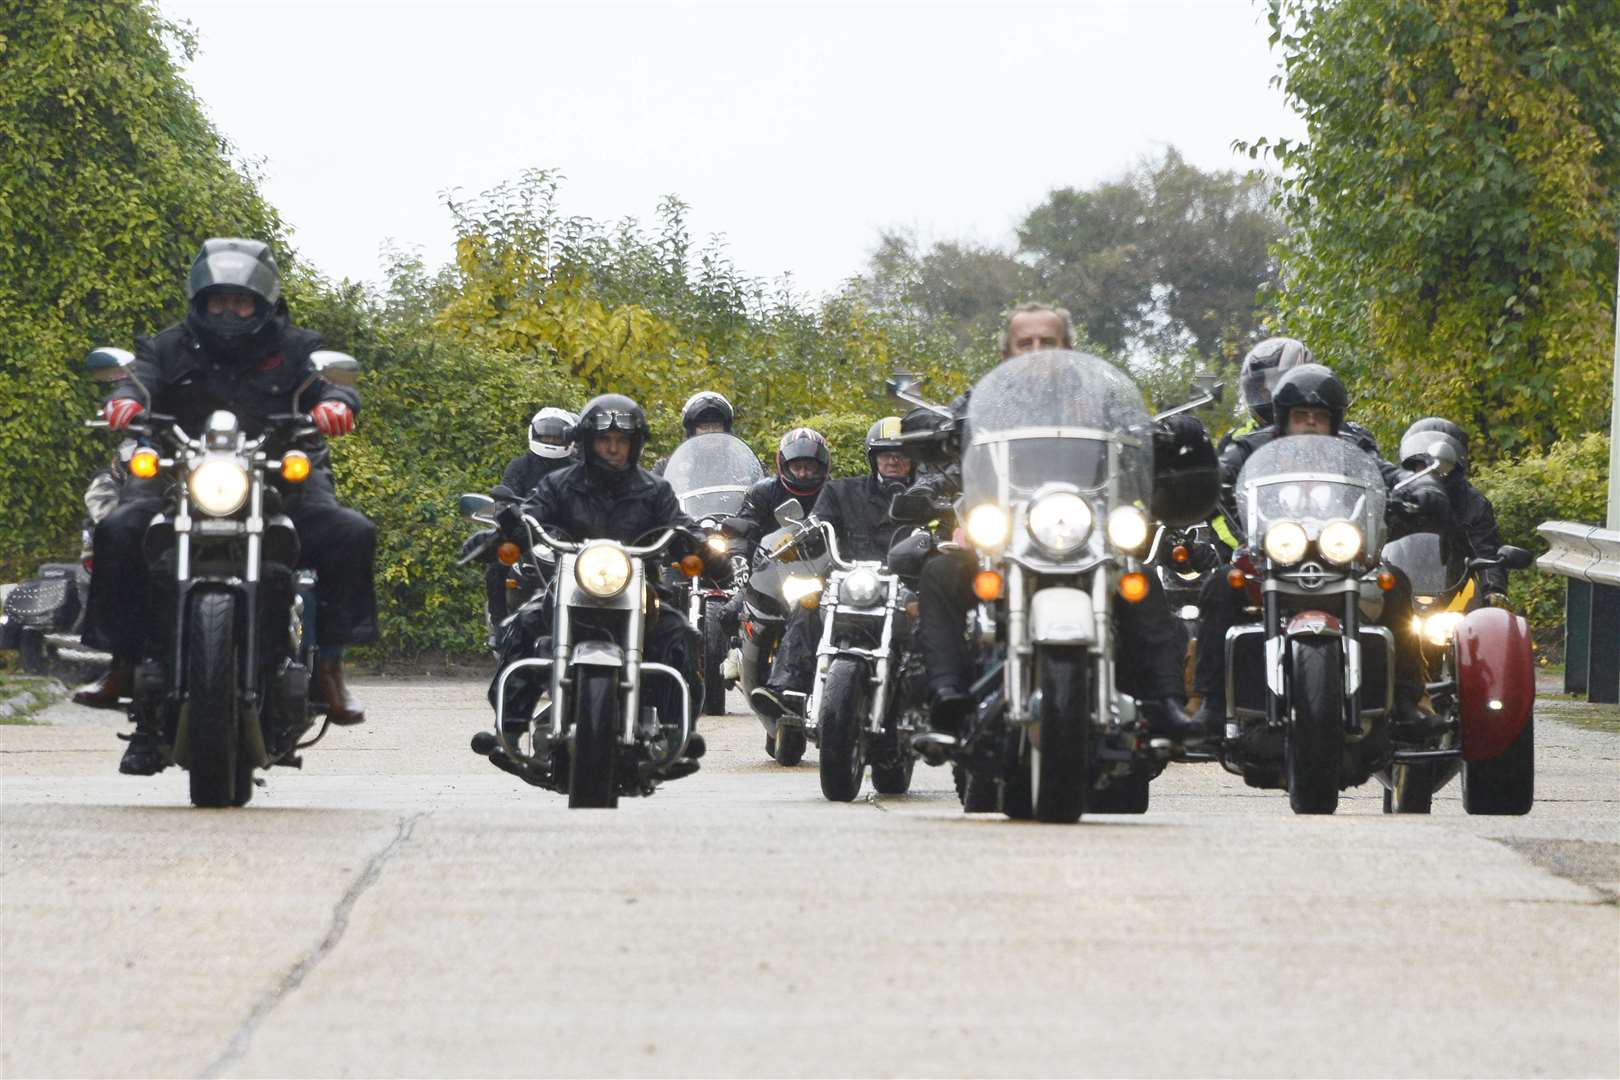 A memorial bike ride to remember Andrew Cresswell, who was murdered 10 years ago, led by Vic Harden. Picture: Paul Amos